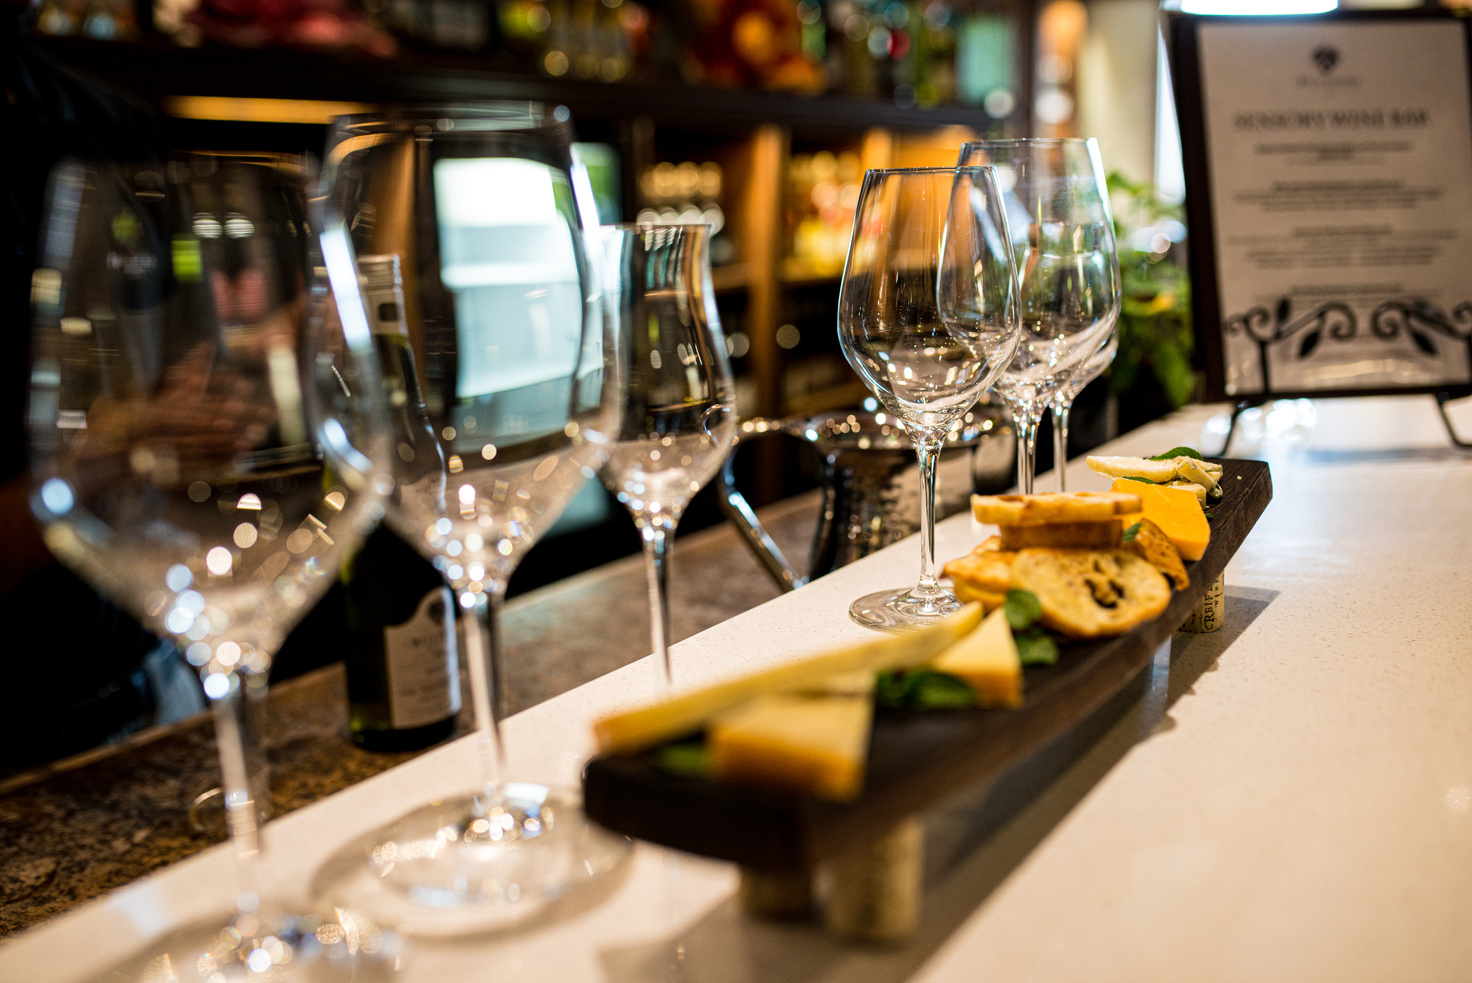 Wine tasting event displaying wine glasses and cheese & crackers.